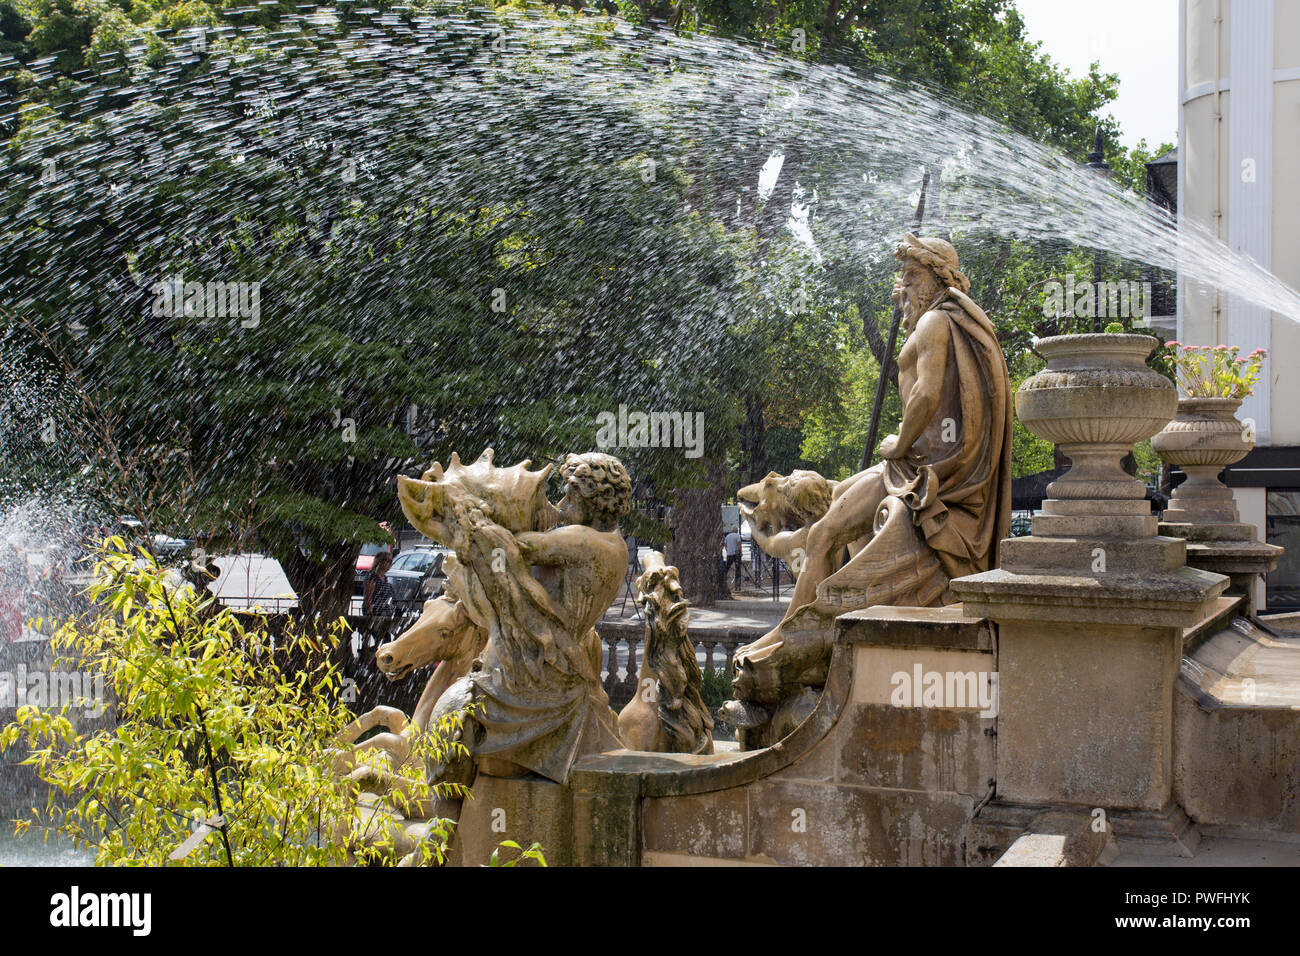 CHELTENHAM, GLOUCESTERSHIRE, ENGLAND - August 7, 2018: The Neptune fountain outside the Municipal offices, based on the Trevi Fountain in rome. Stock Photo